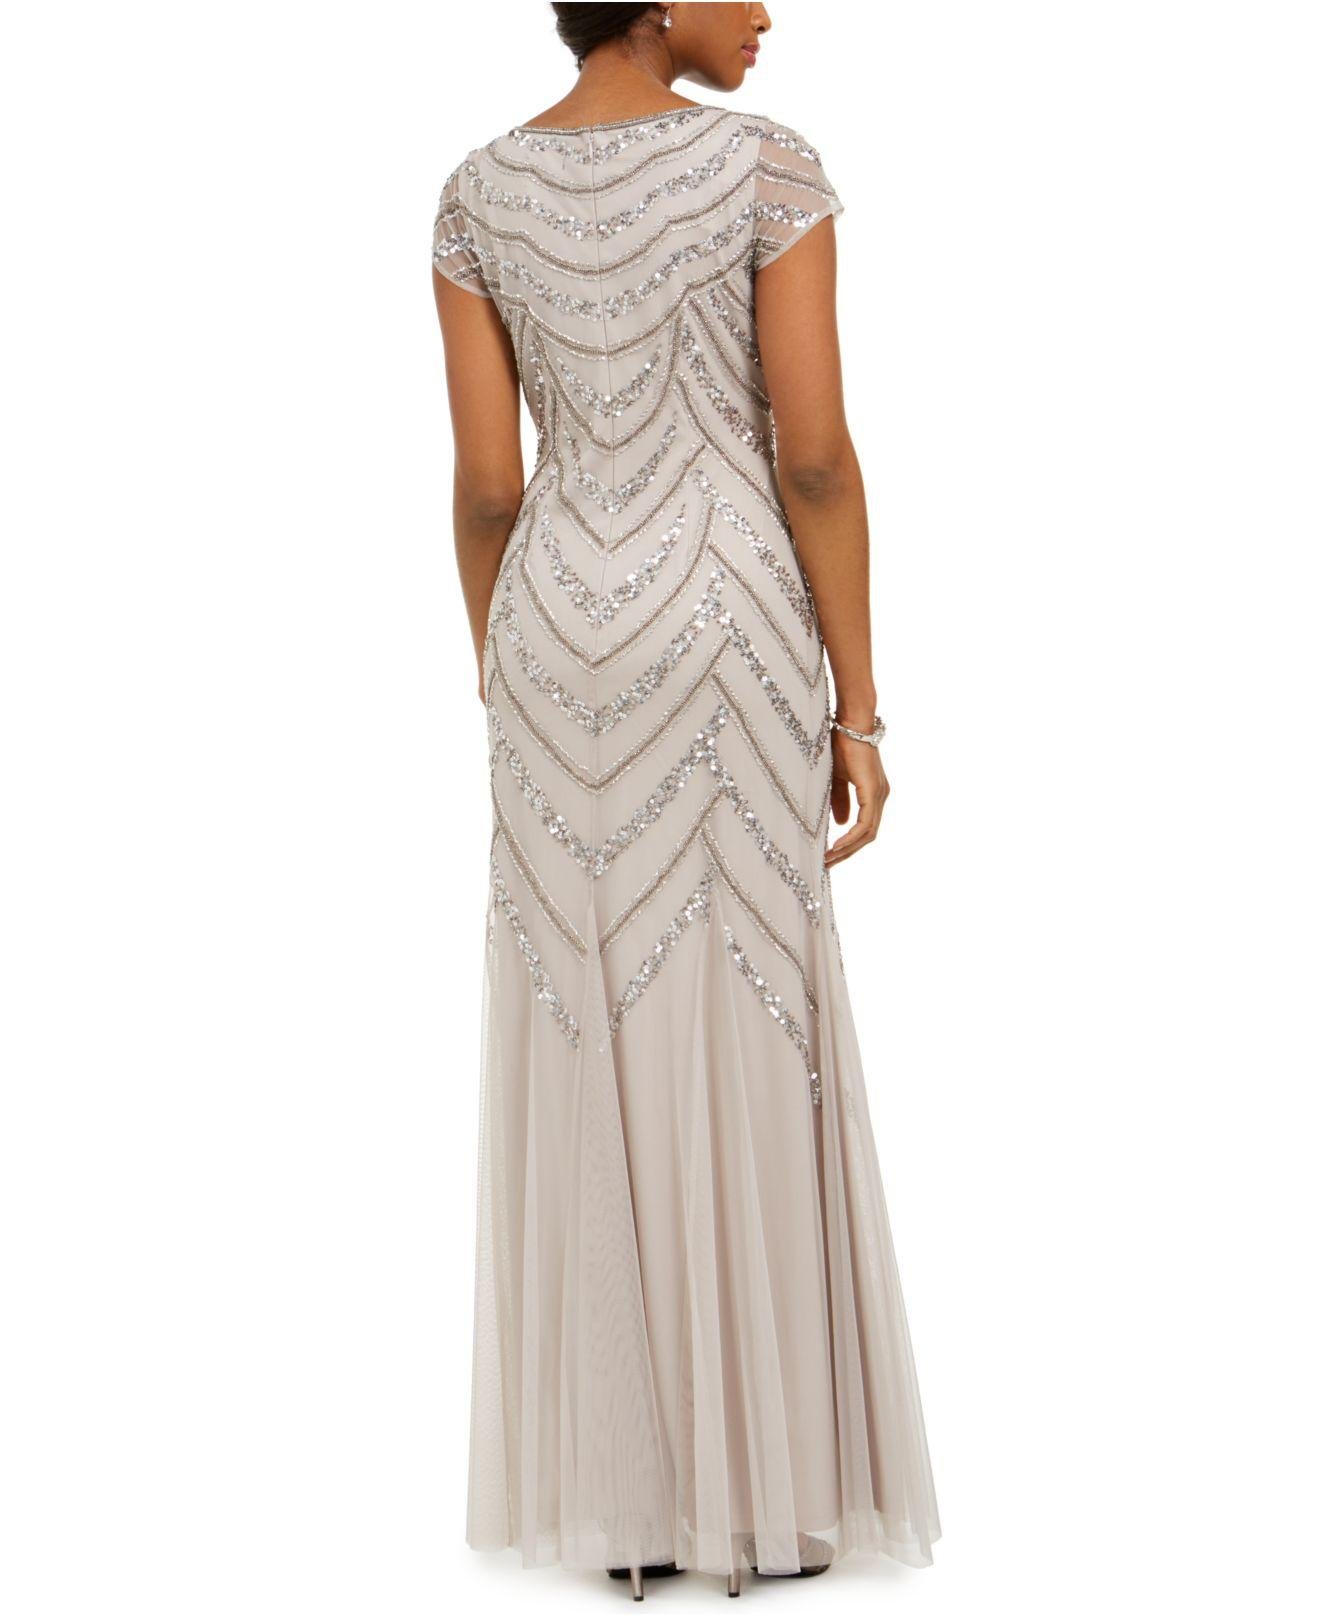 Adrianna Papell Synthetic Embellished Godet-inset Gown - Lyst